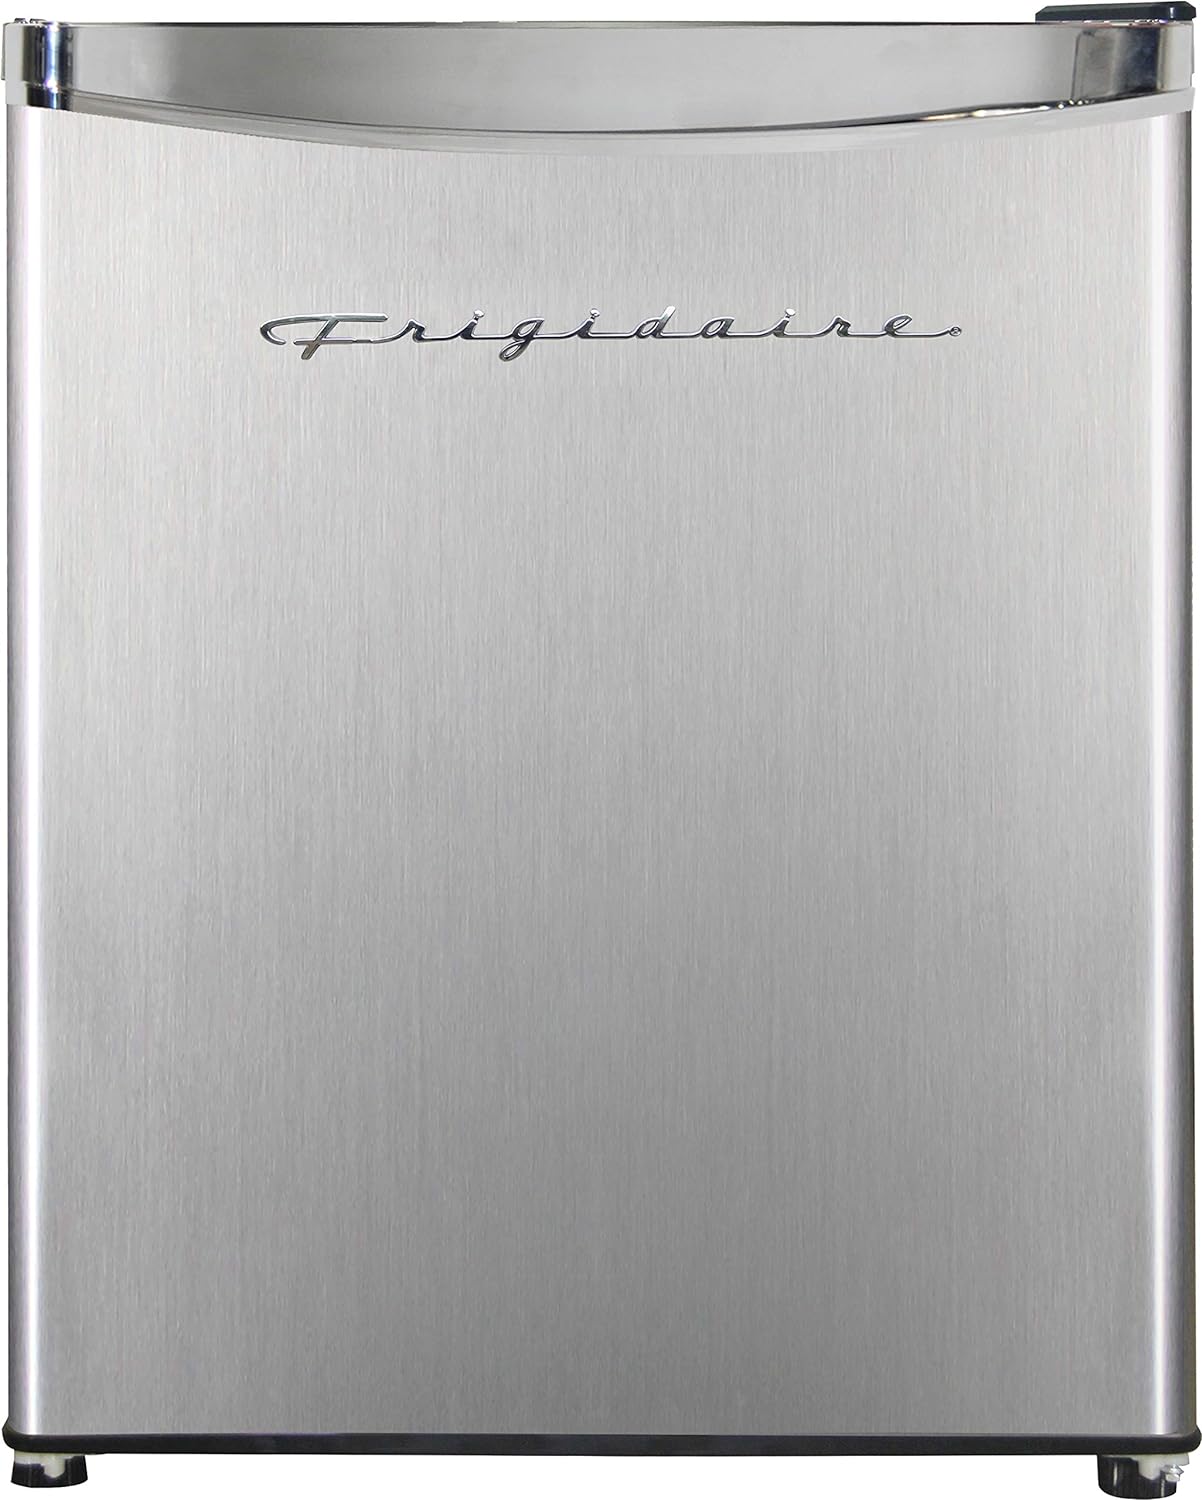 upright-freezer-efrf114-stainless steel-1